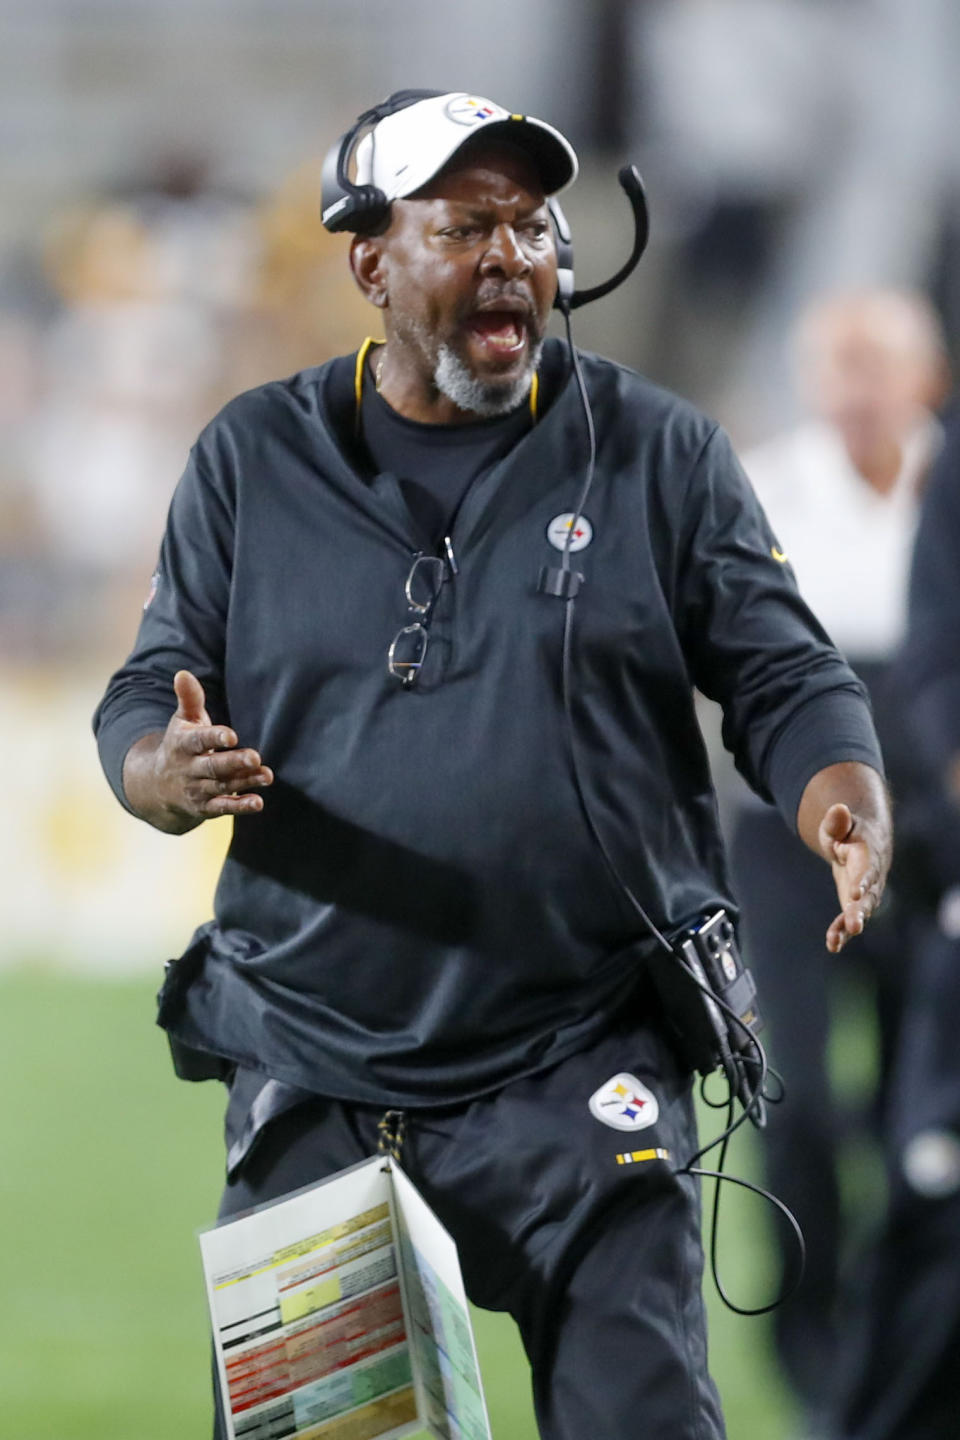 In this photo from Friday, Aug. 9, 2019, Pittsburgh Steelers wide receivers coach Darryl Drake talks to a receiver during the second half of an NFL preseason football game against the Tampa Bay Buccaneers in Pittsburgh. The team said Drake, who joined the coaching staff in 2018, died early Sunday morning, Aug. 12, 2019. (AP Photo/Keith Srakocic)